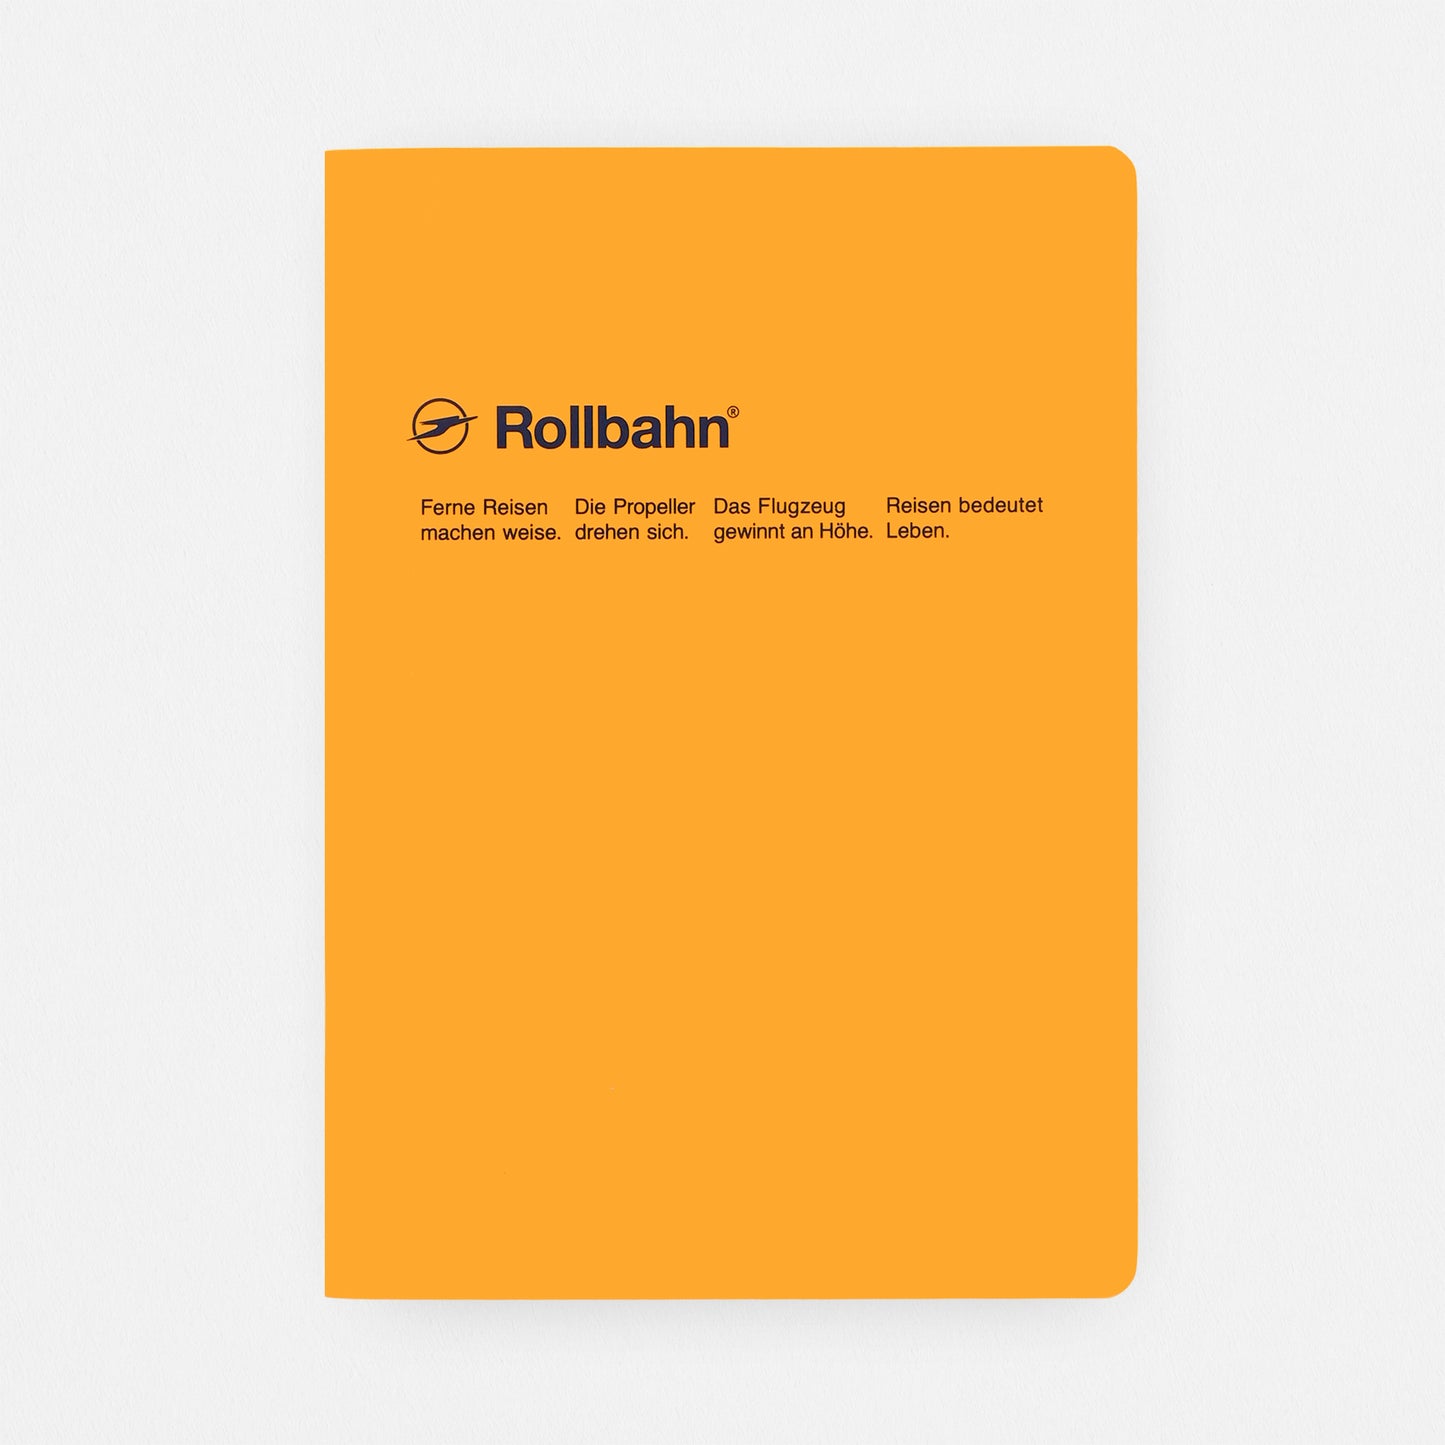 Delfonics Rollbahn "Note" Notebook Pocket, Large, A5 Or Extra Large  | 10 Colors Yellow / Pocket A6 ( 4 x 6")